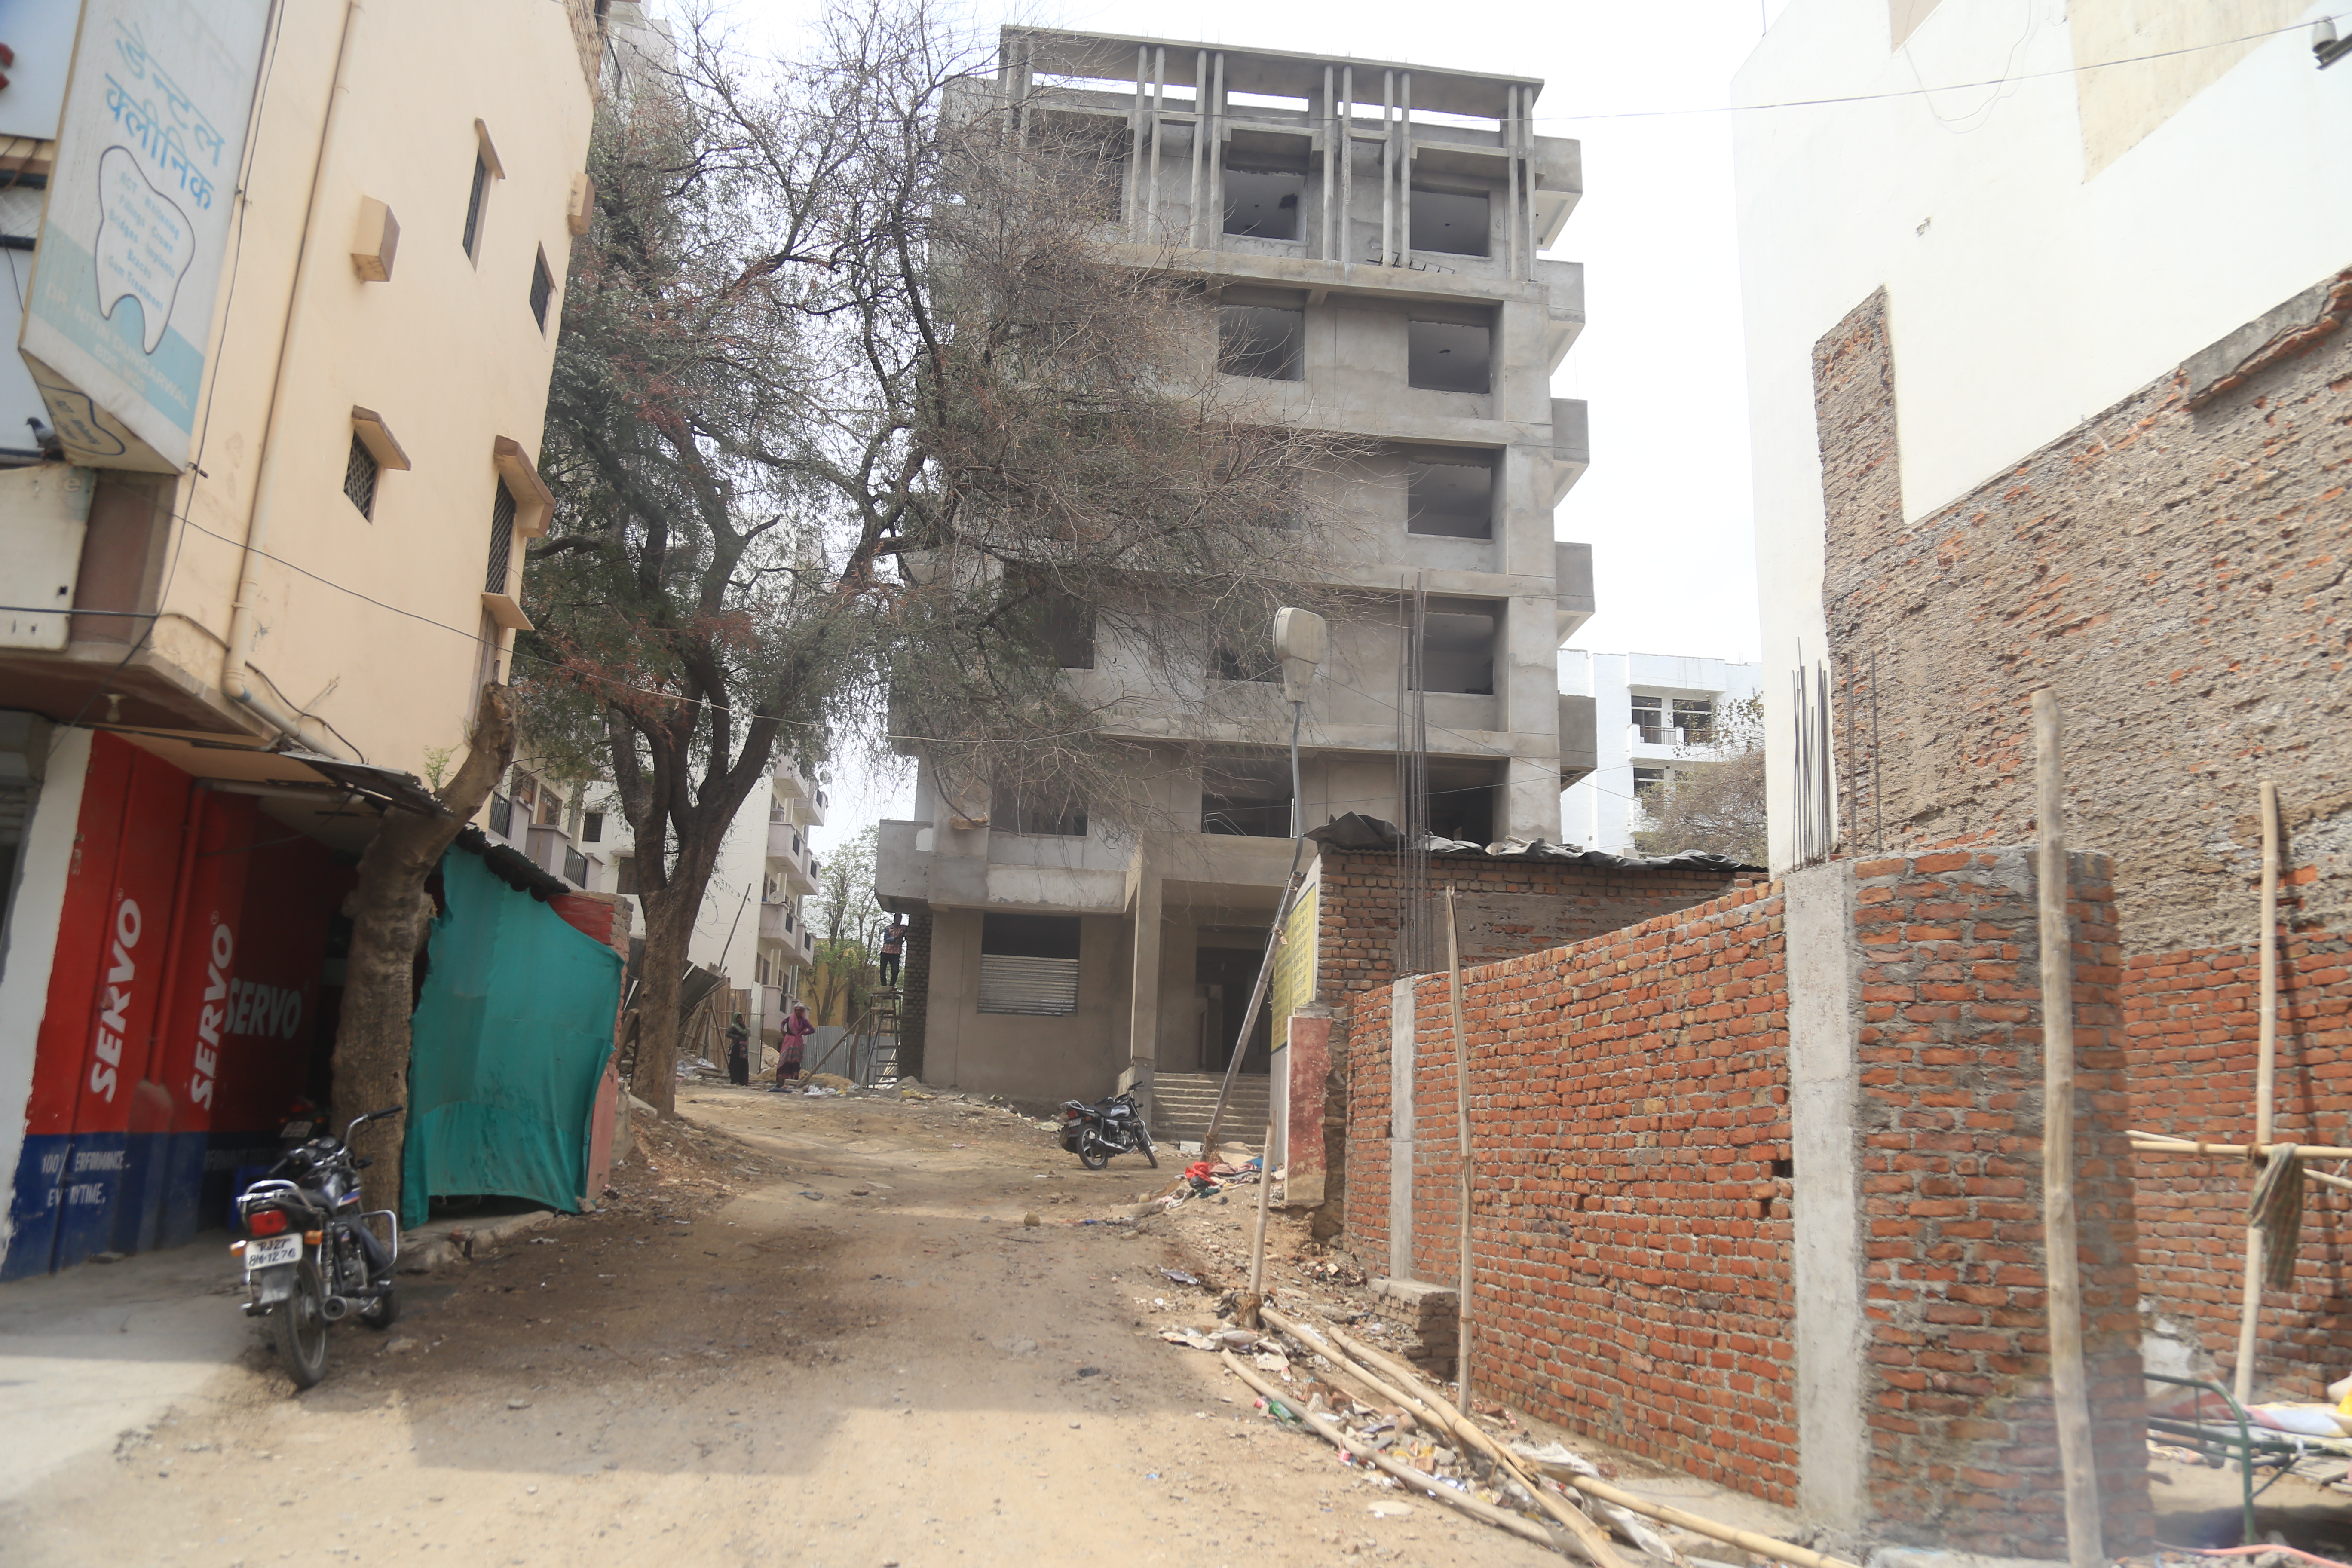 Encroachment by making wall on the entrance of the hostel